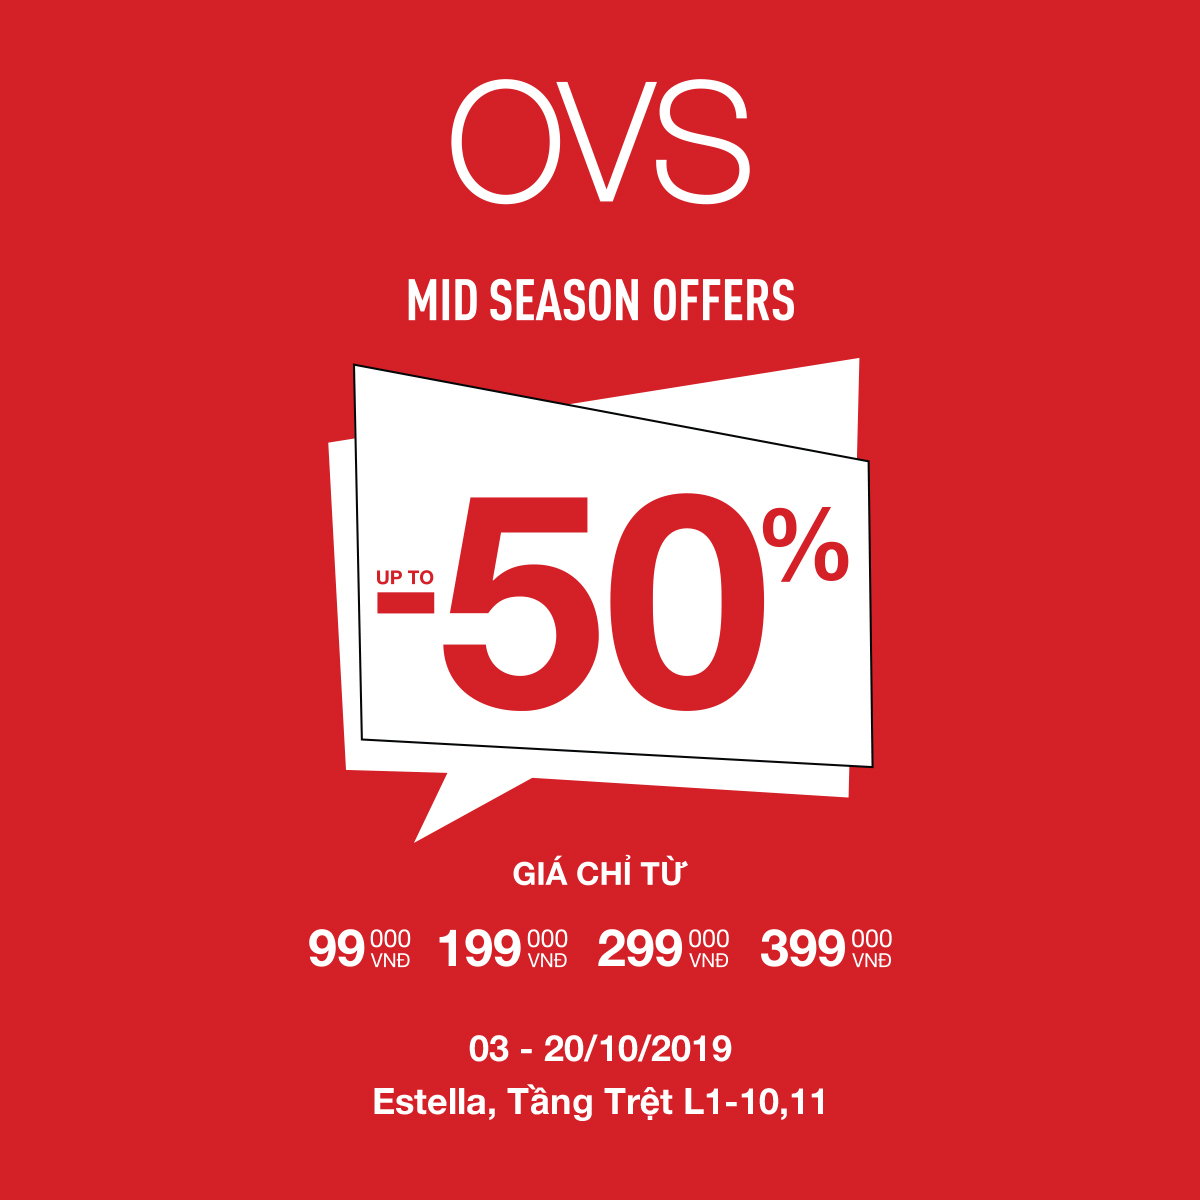 [OVS] MID SEASON OFFERS – SALE UP TO 50%